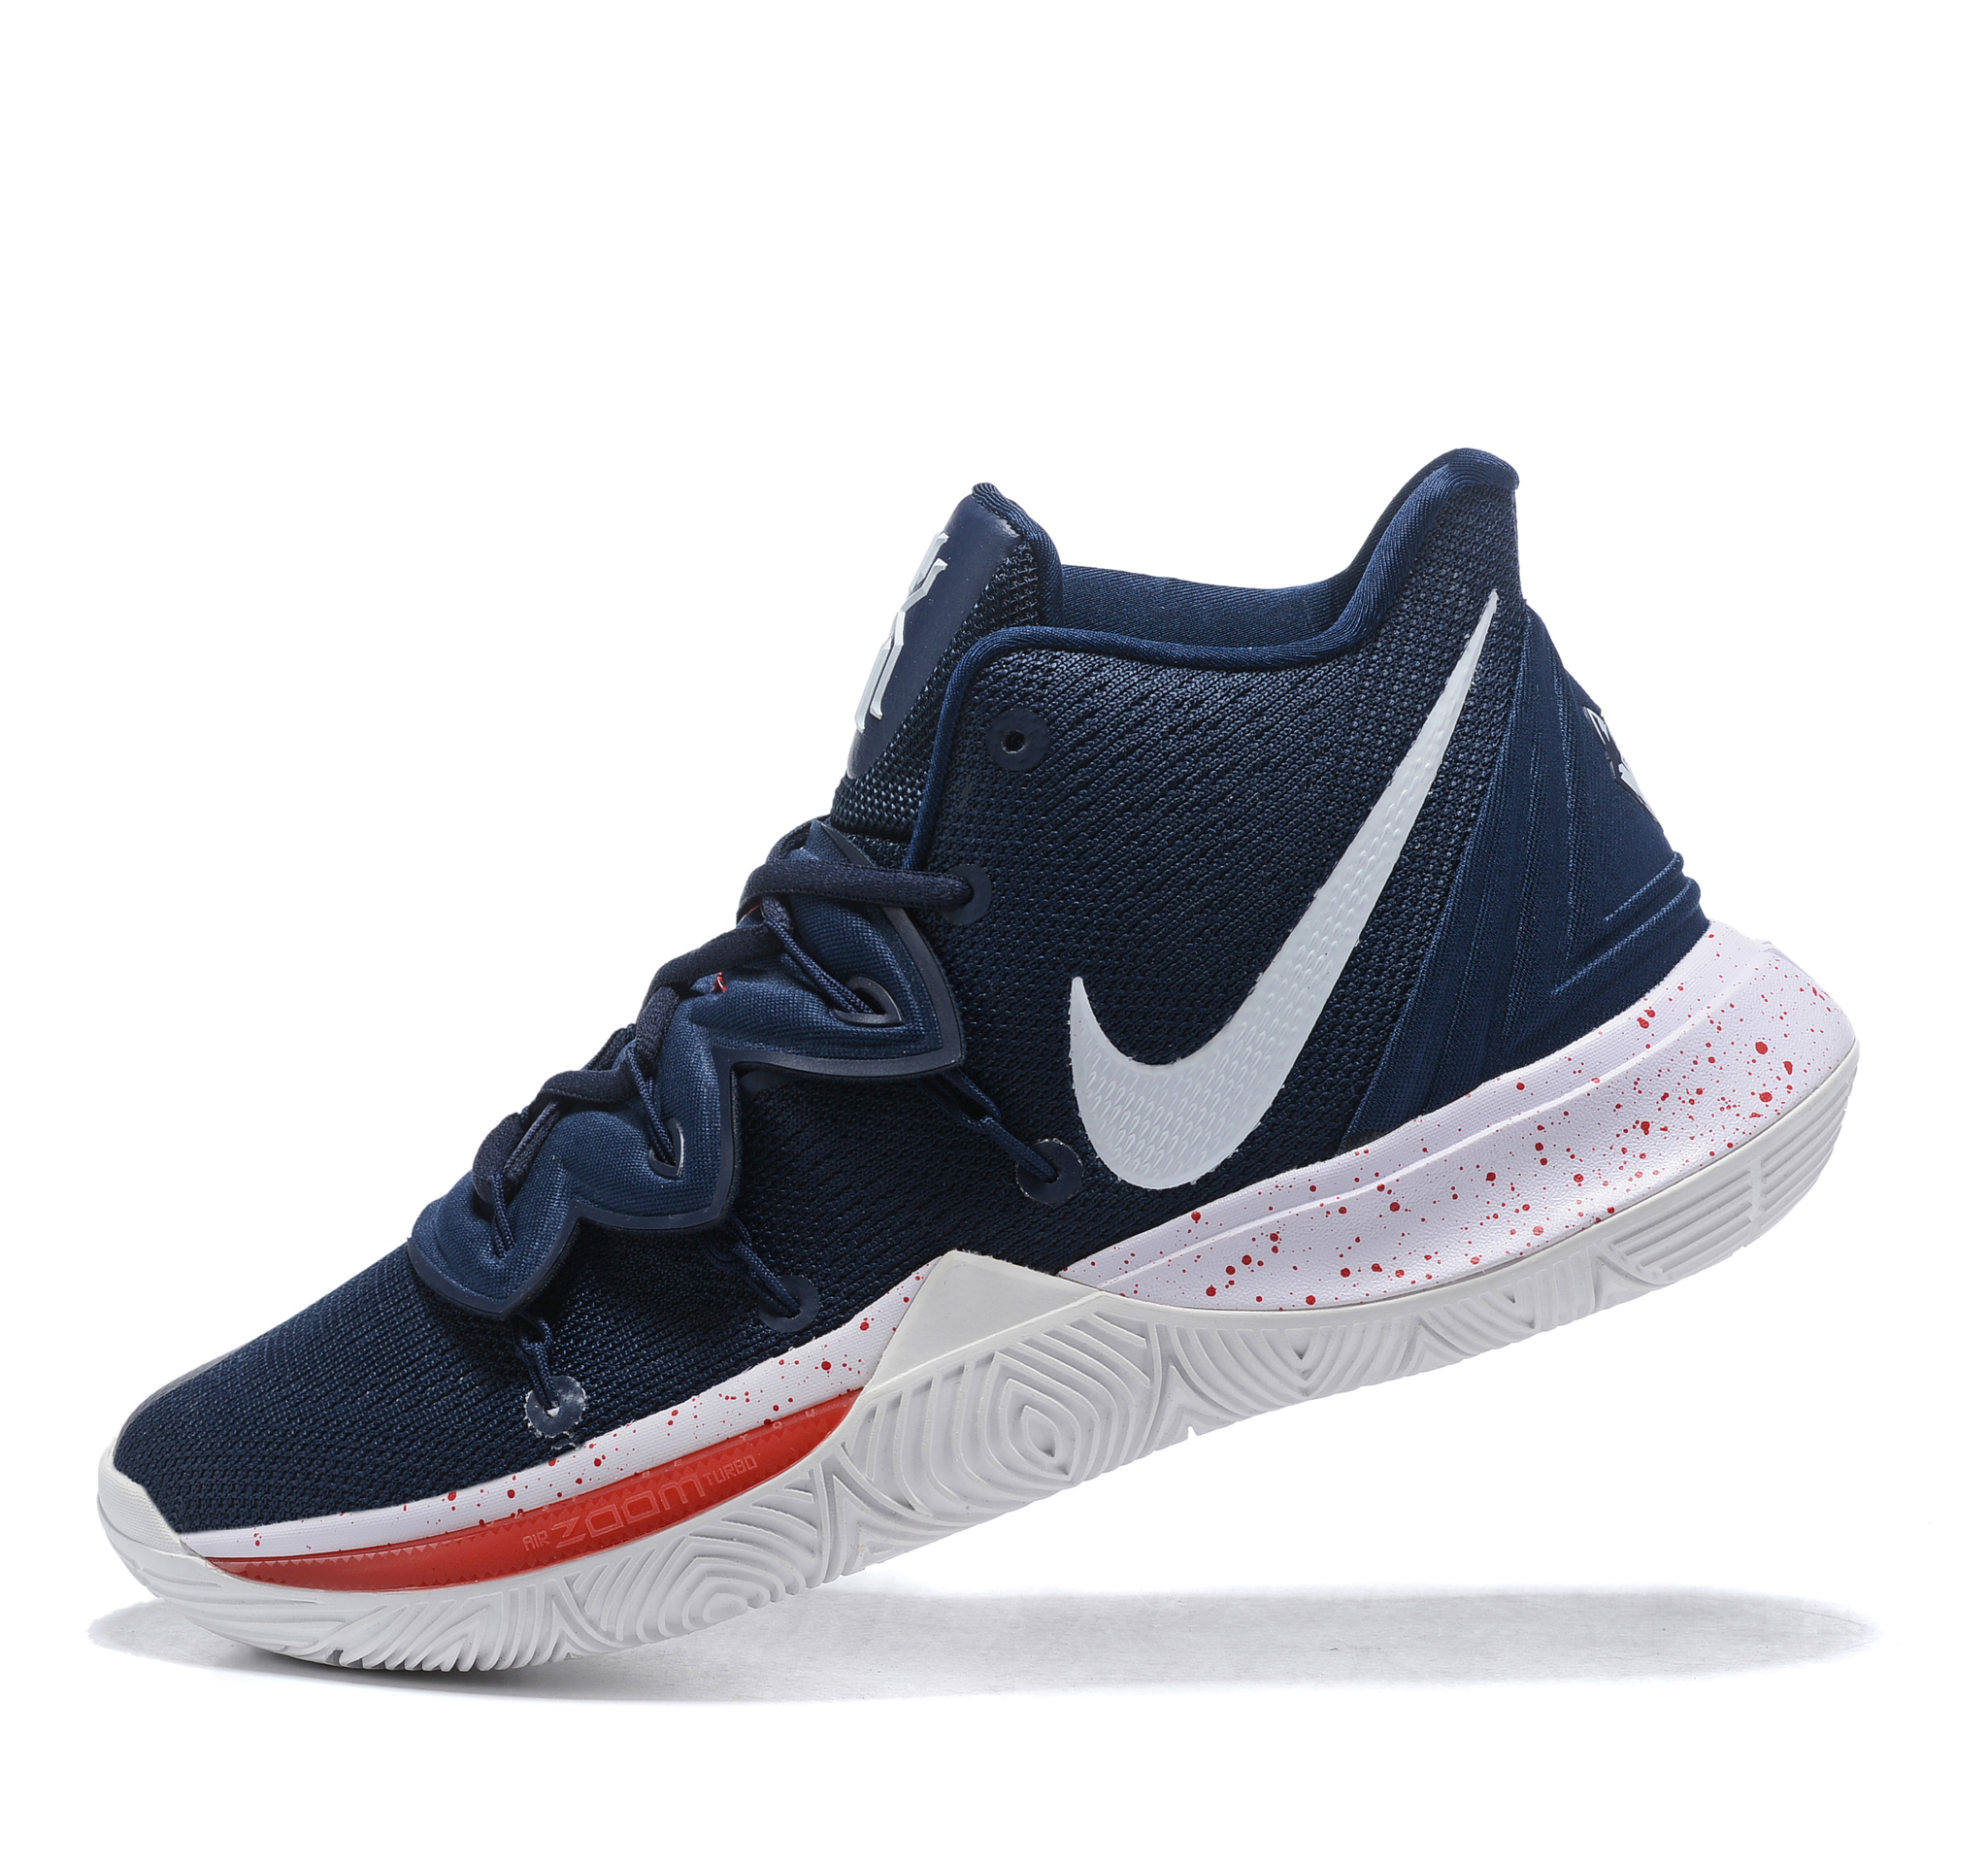 kyrie 5 store